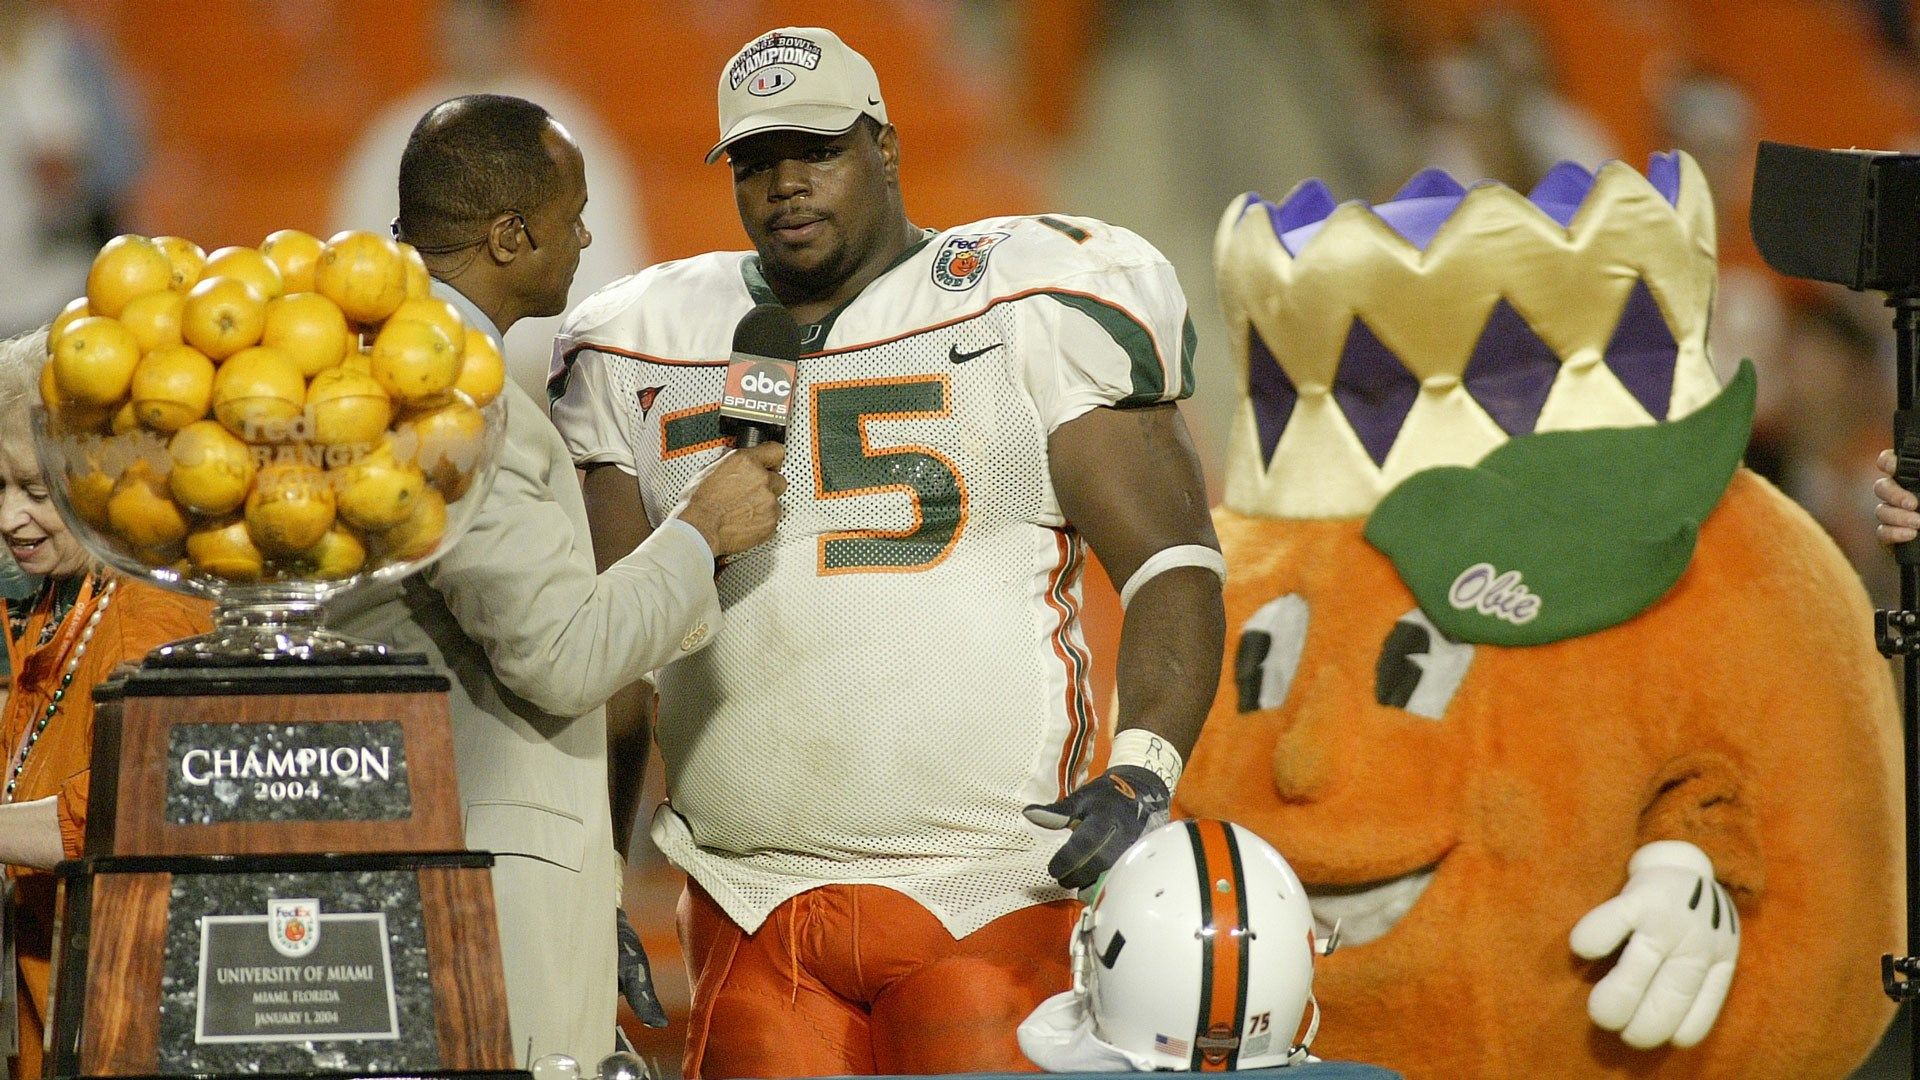 Hurricanes Legend Wilfork to Serve as Honorary Captain vs UF